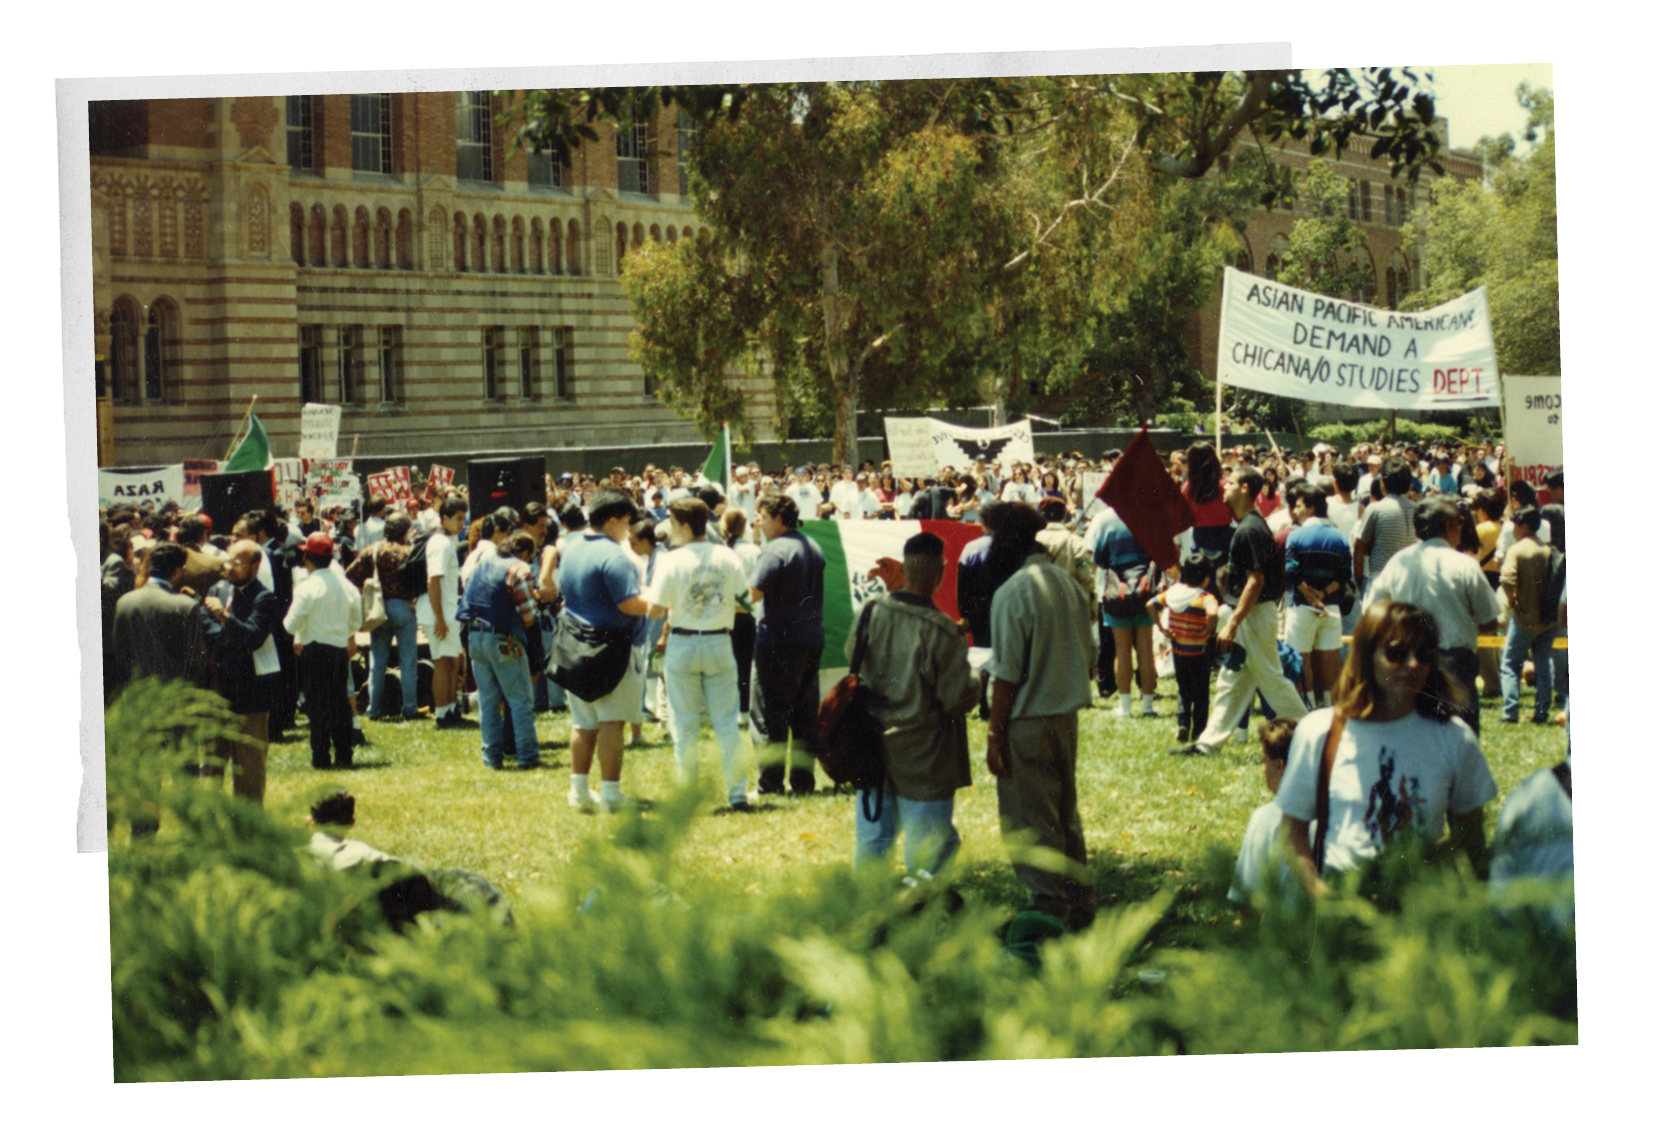 Students at a rally on Dickson Plaza to demand departmental status for Chicano studies in 1993.